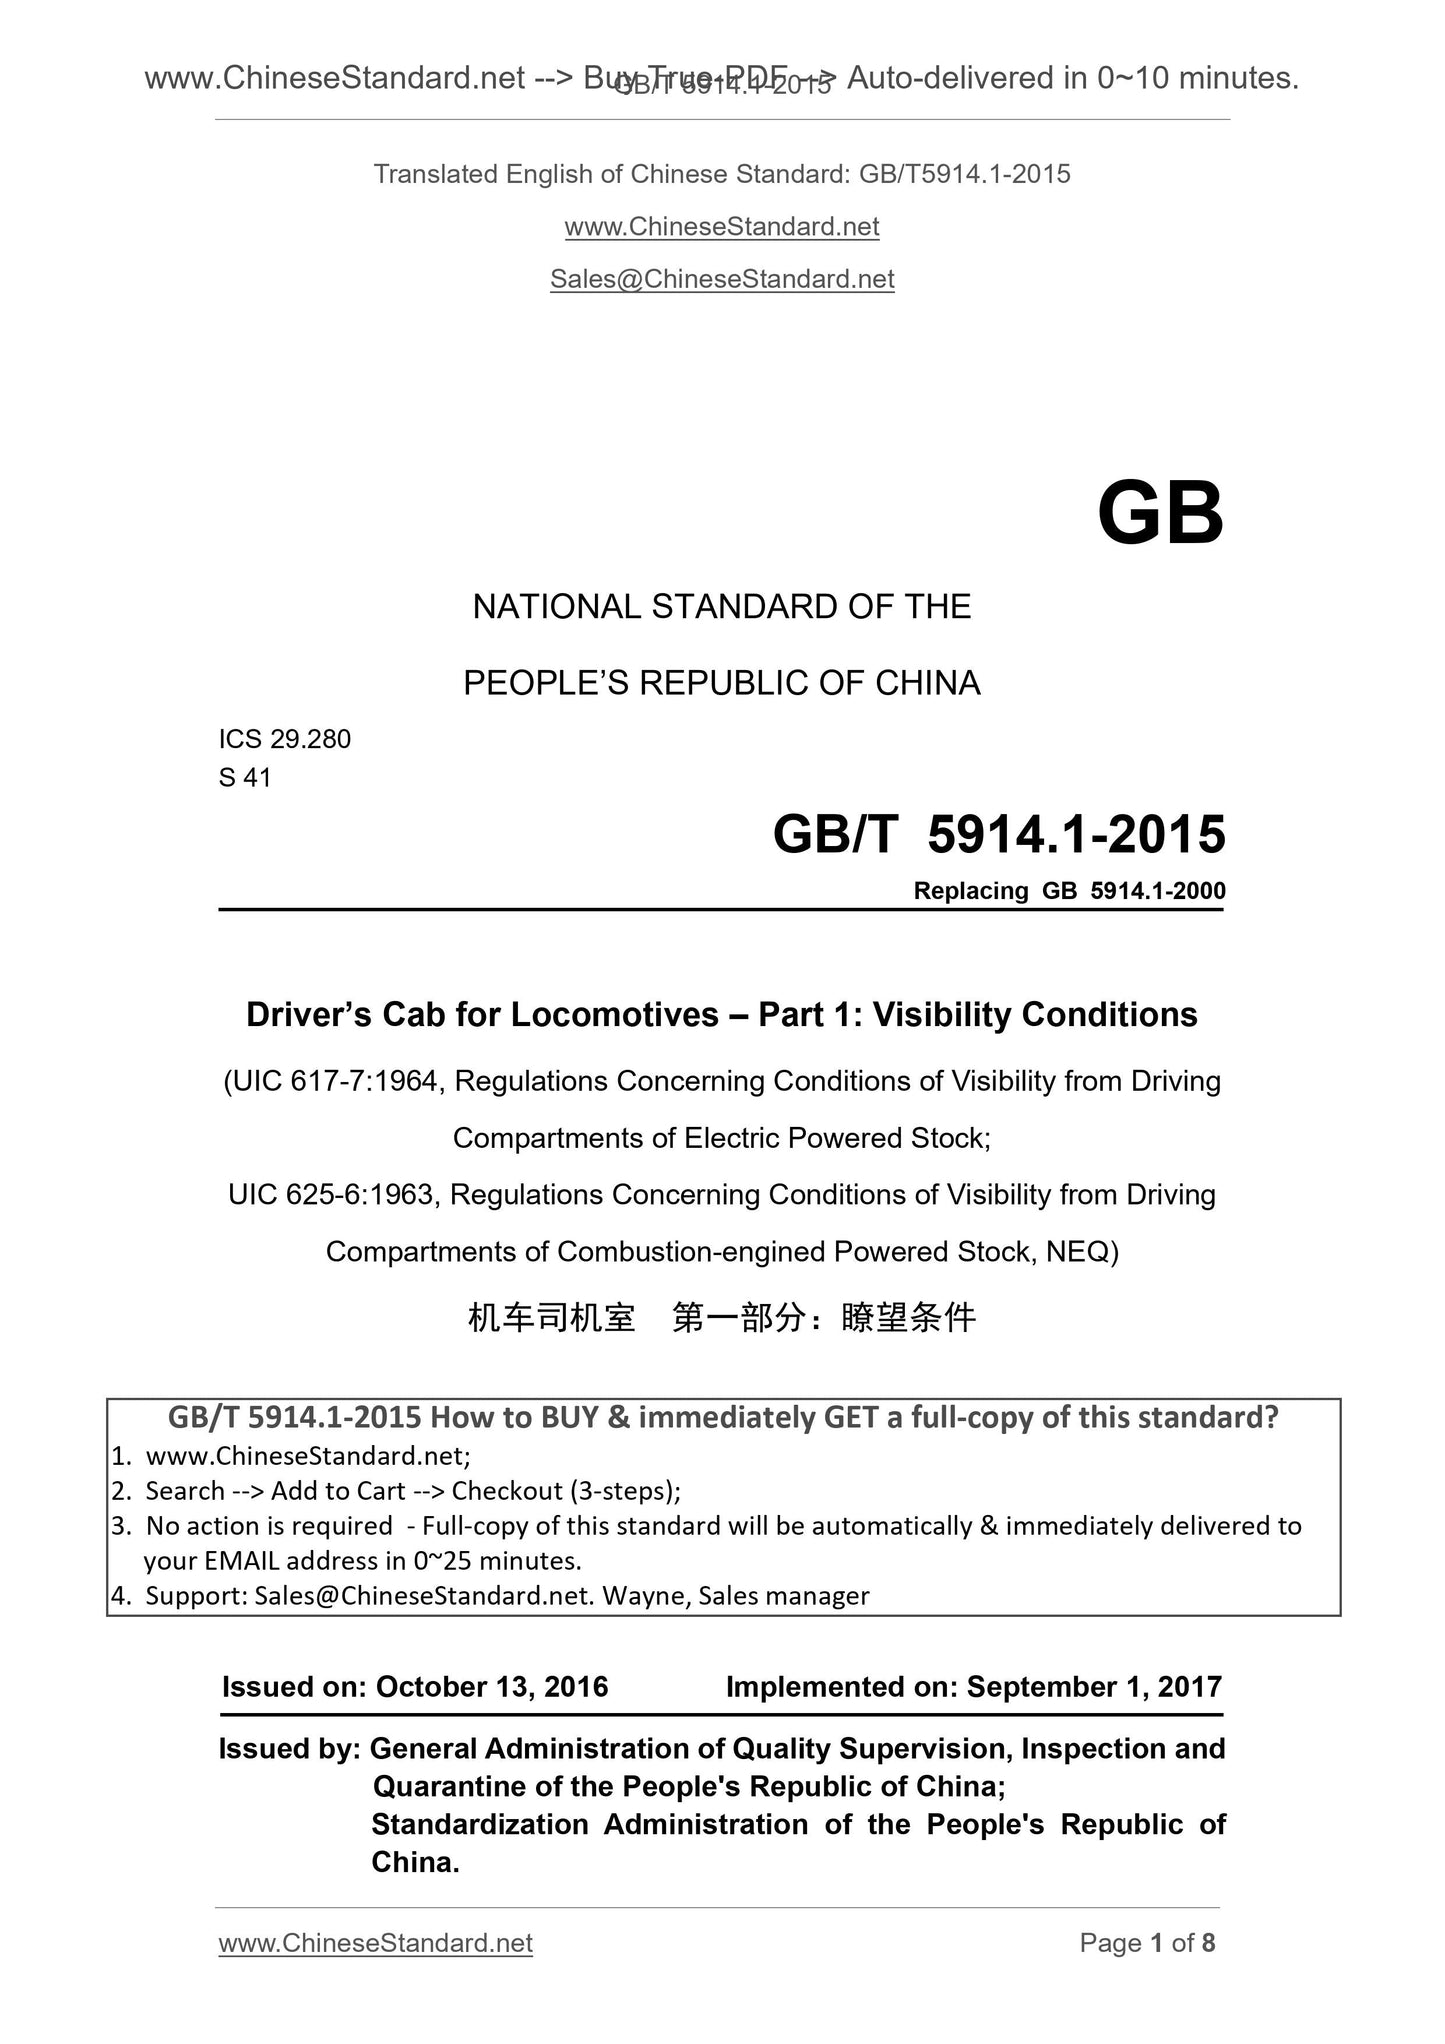 GB/T 5914.1-2015 Page 1